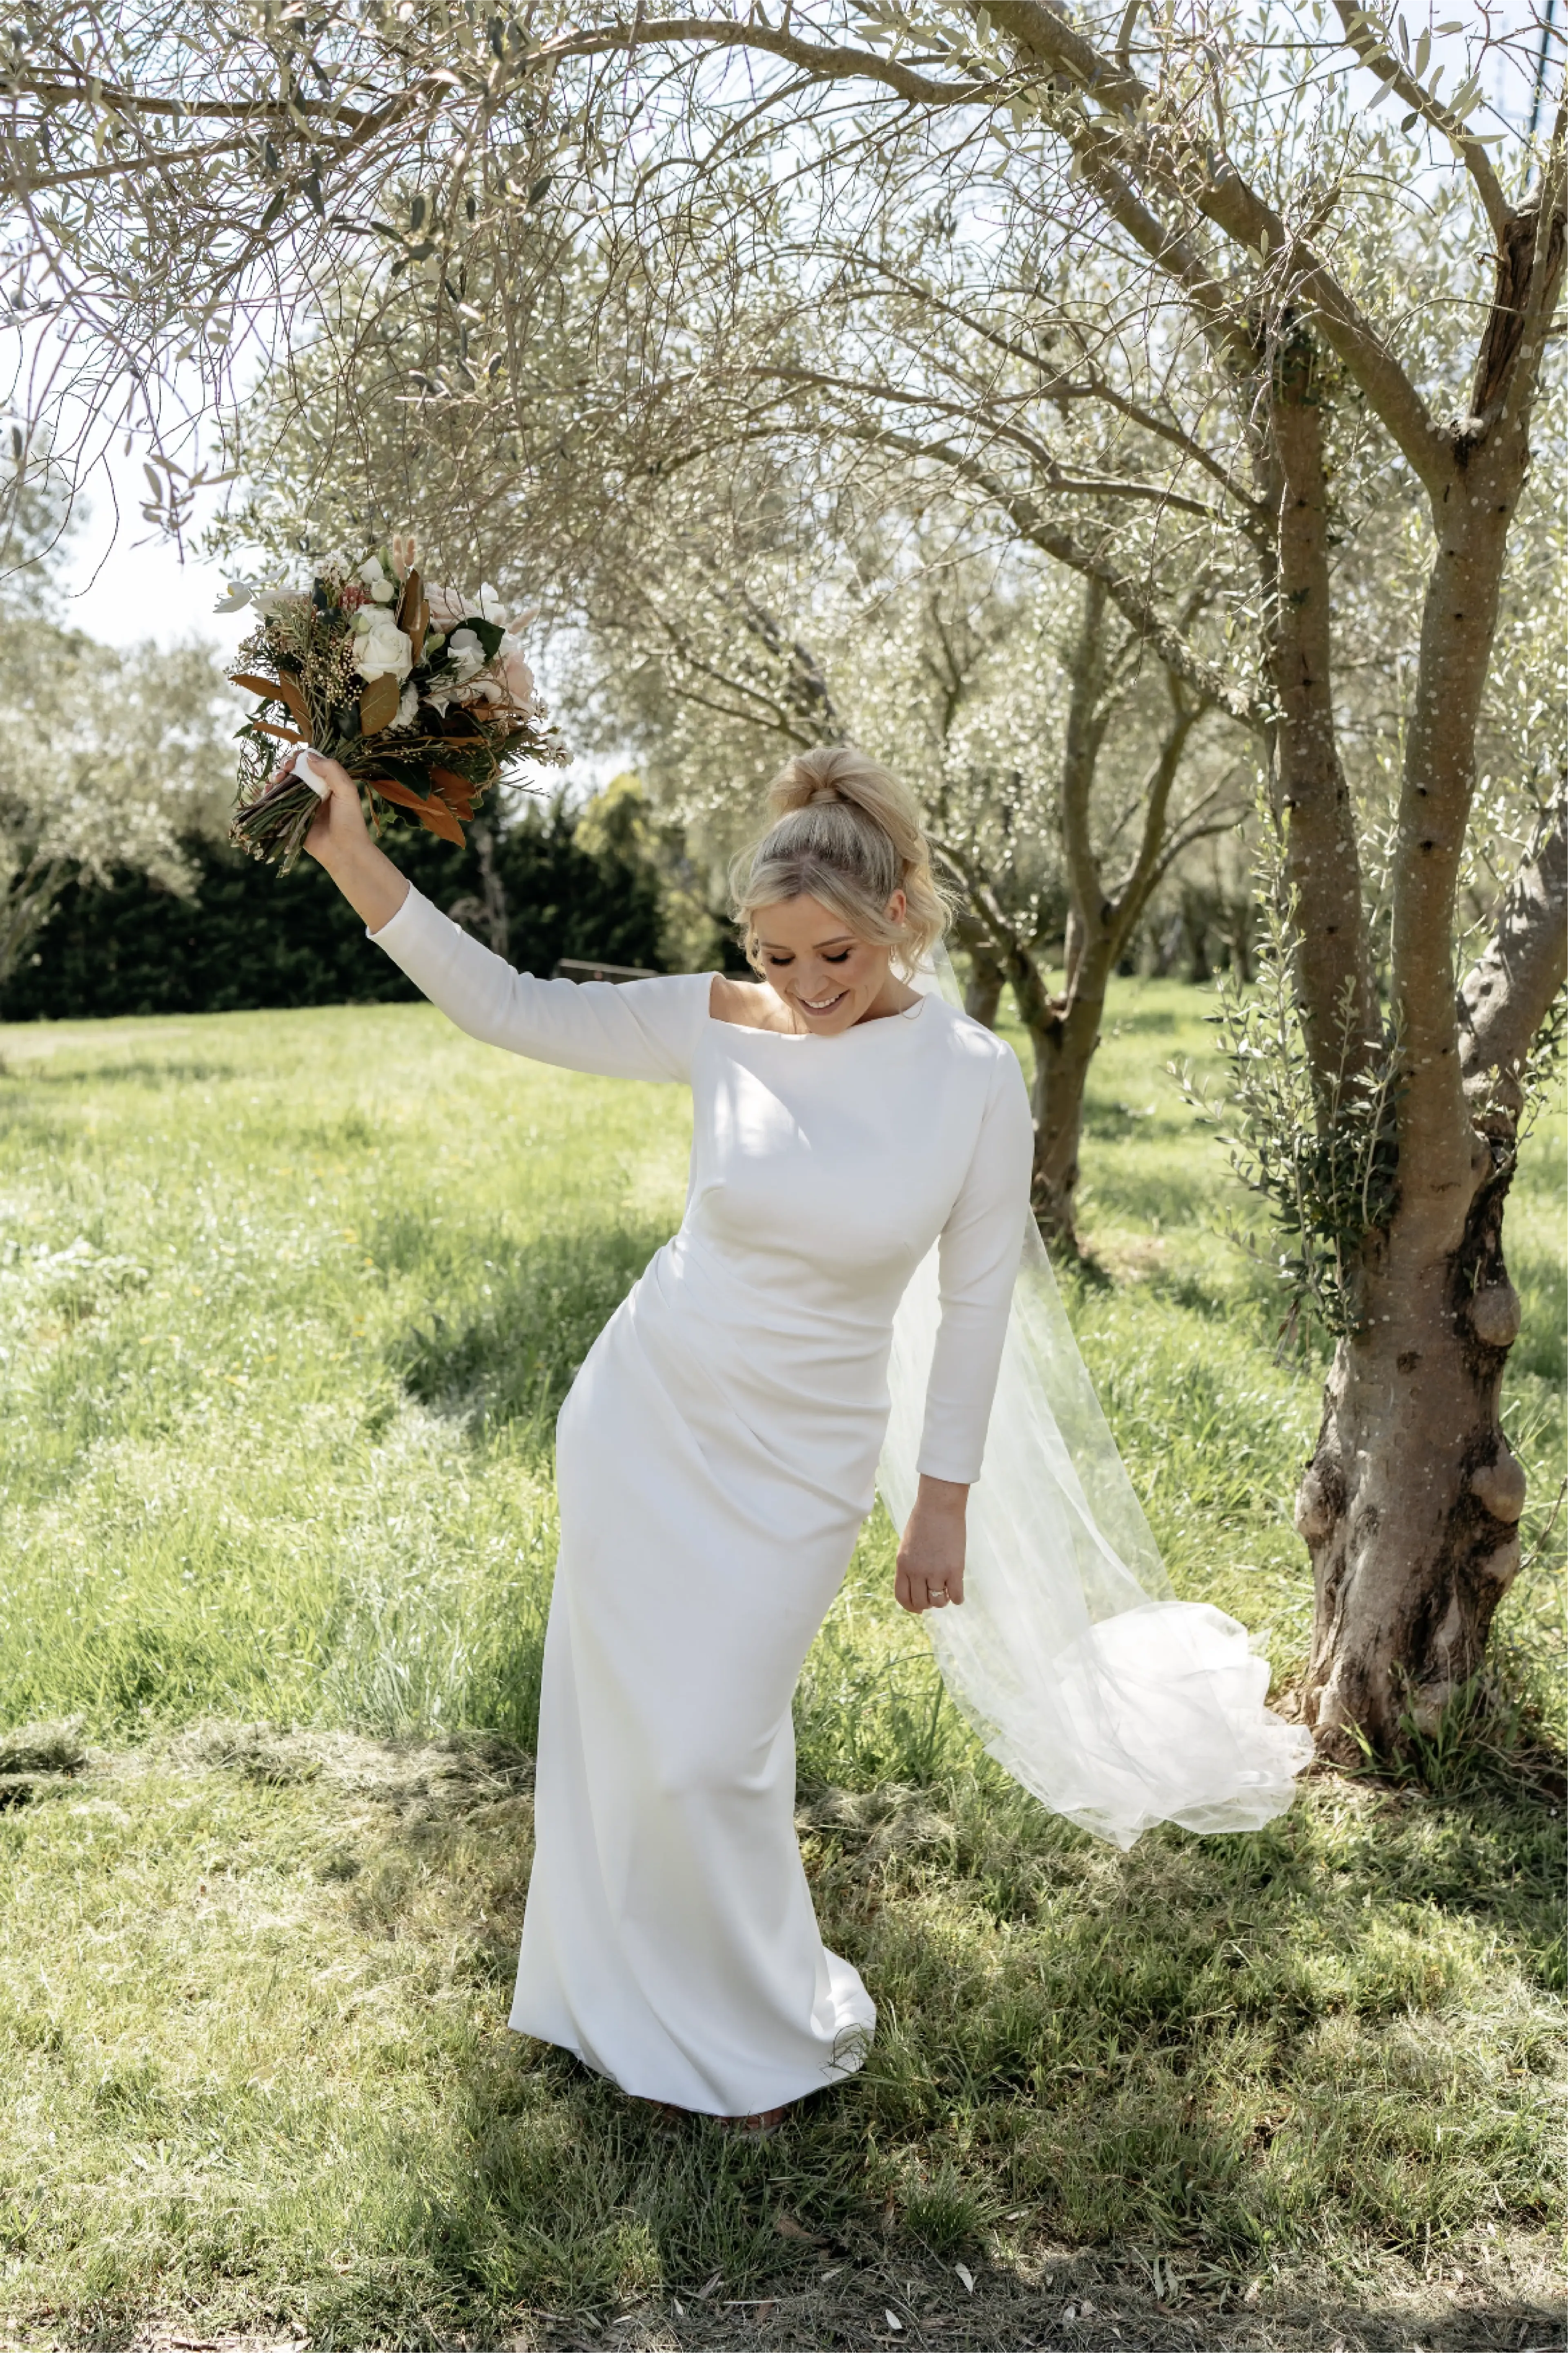 Bride standing under a tree wearing a high-neckline wedding dress with three-quarter sleeves. A delicate headpiece trails behind her as she holds a bouquet of flowers.